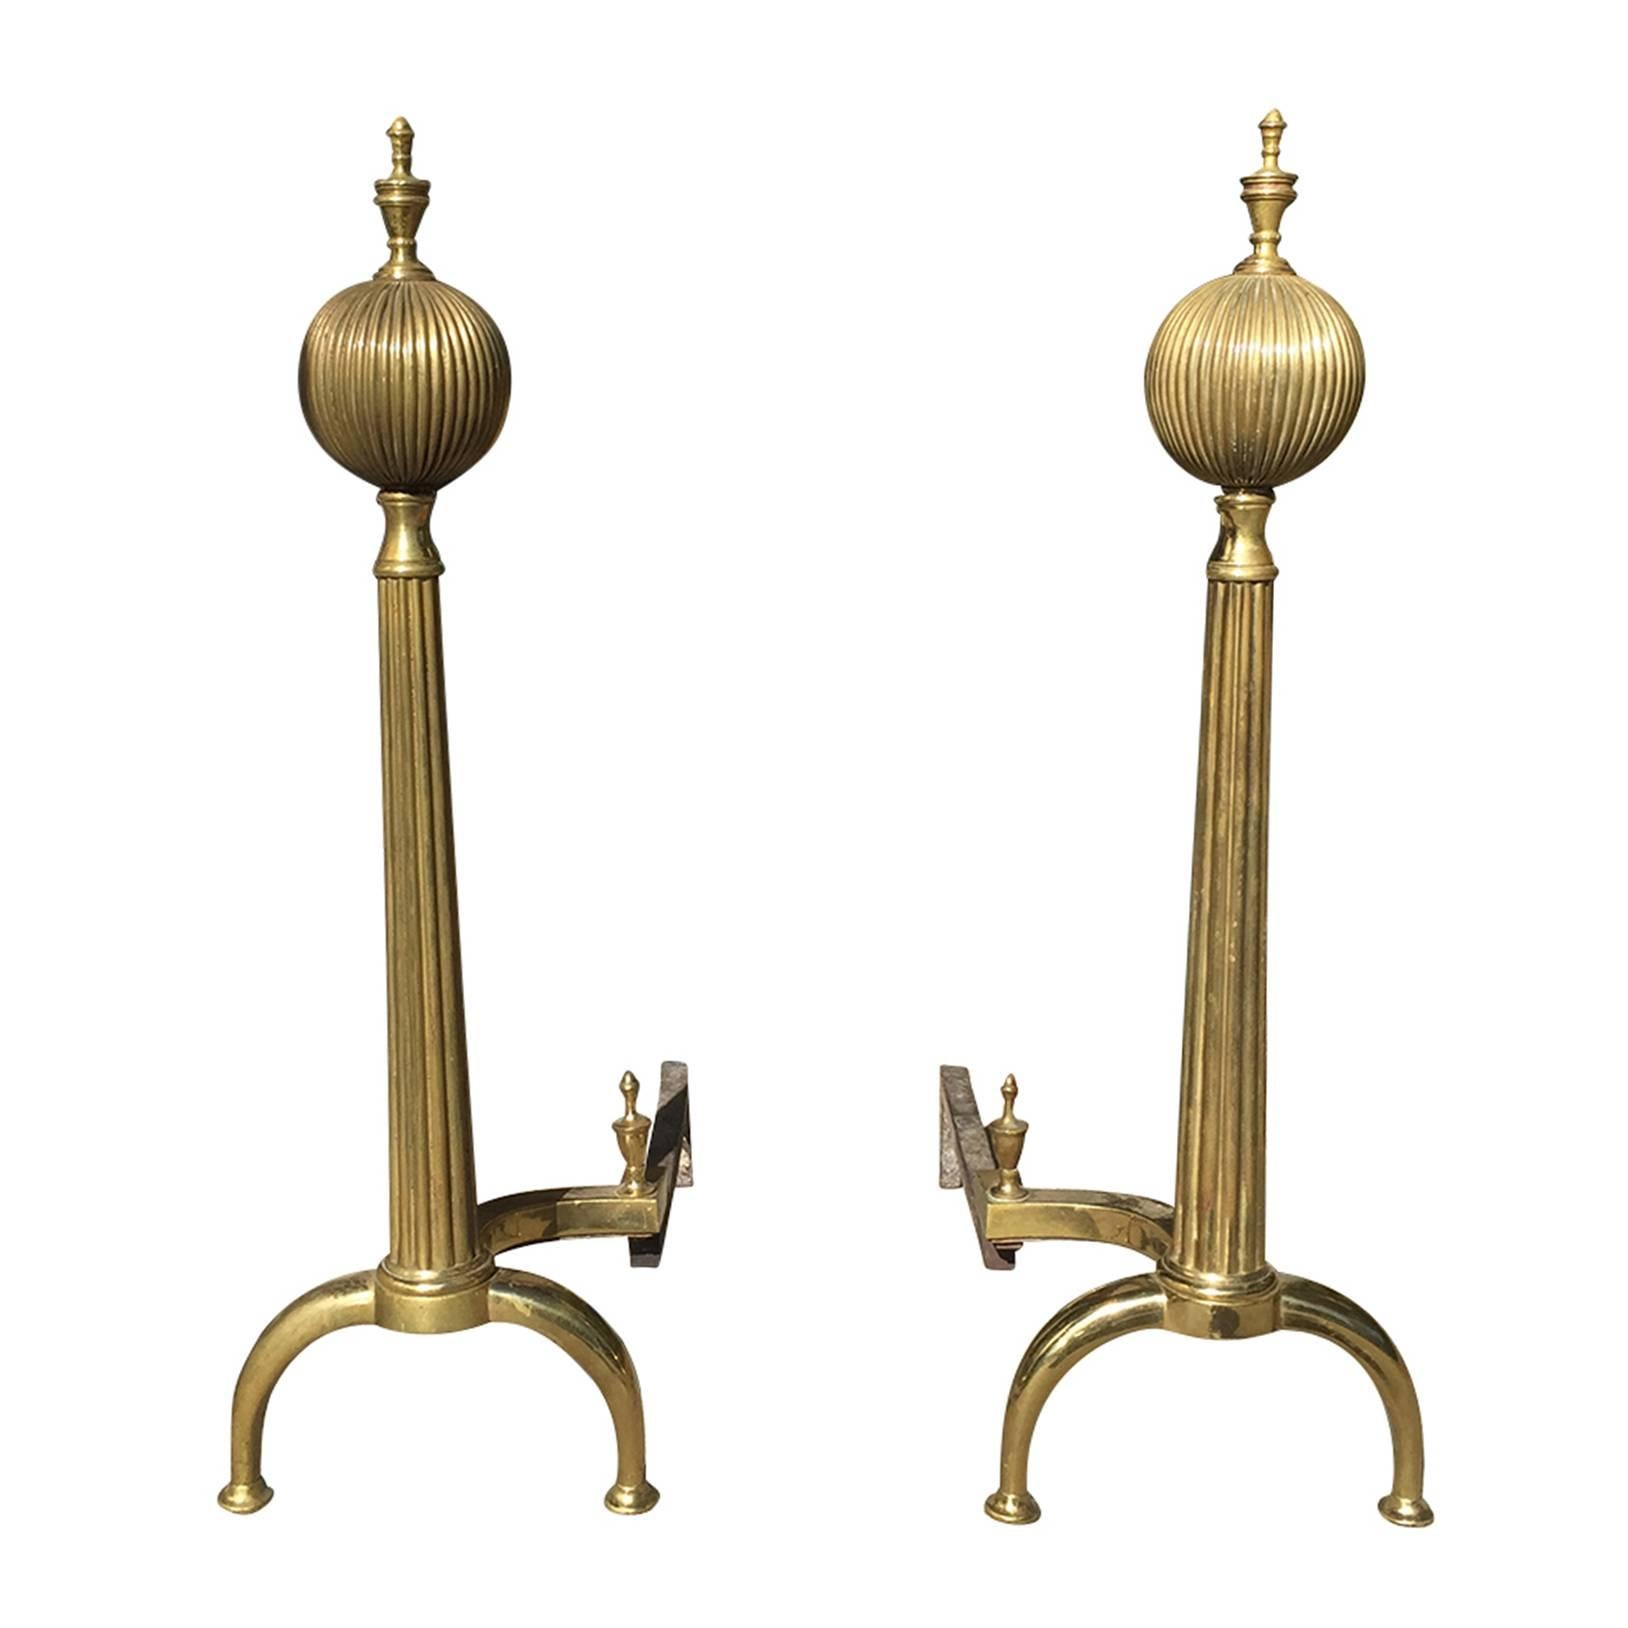 20th Century Tall Brass Andirons with Melon Finial